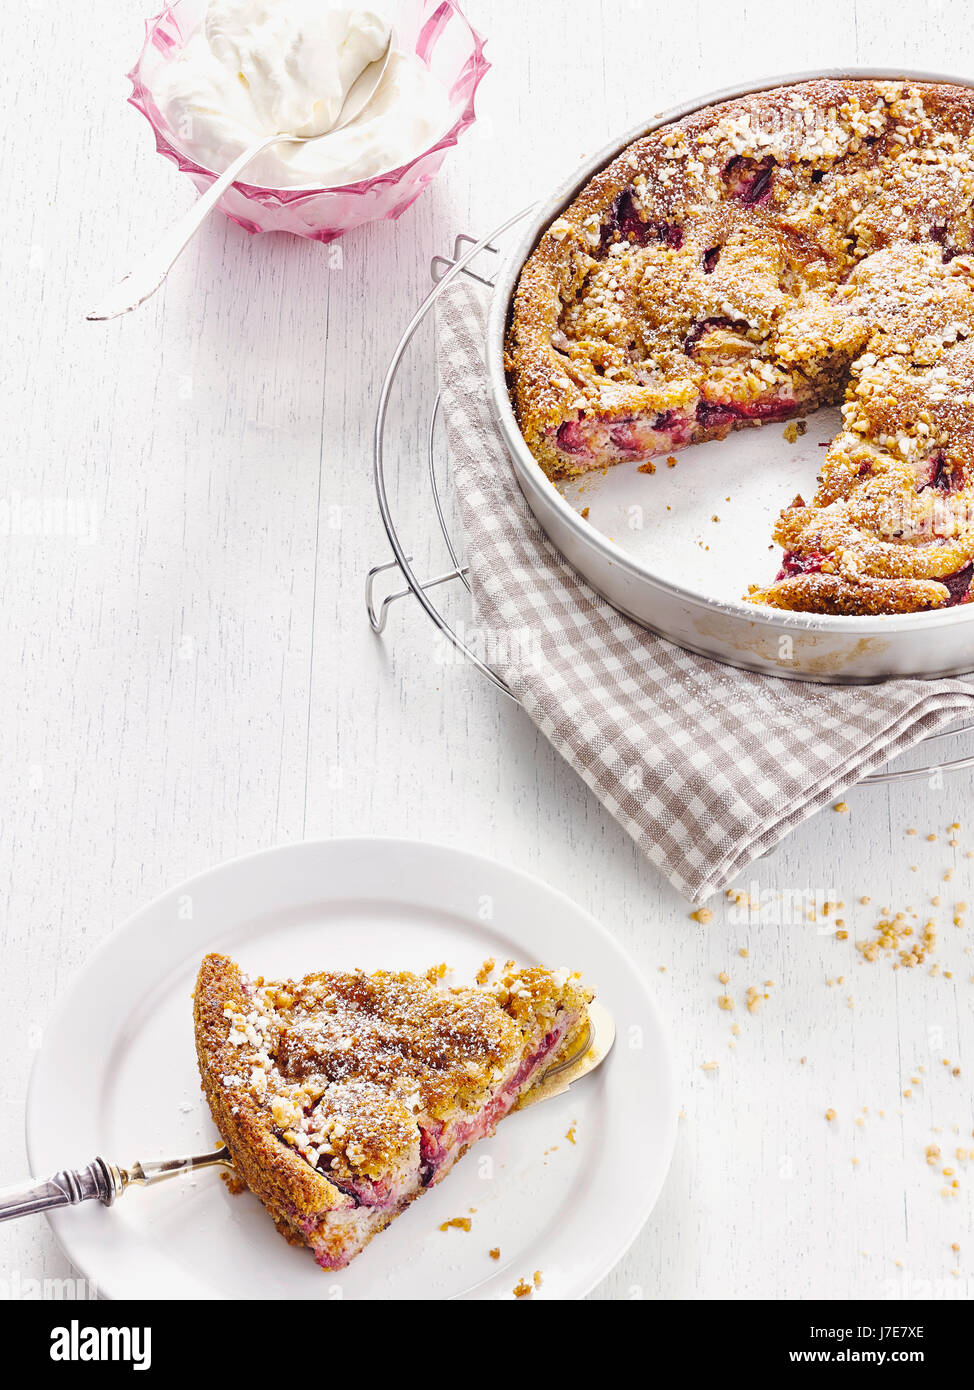 Plum cake with brittles Stock Photo